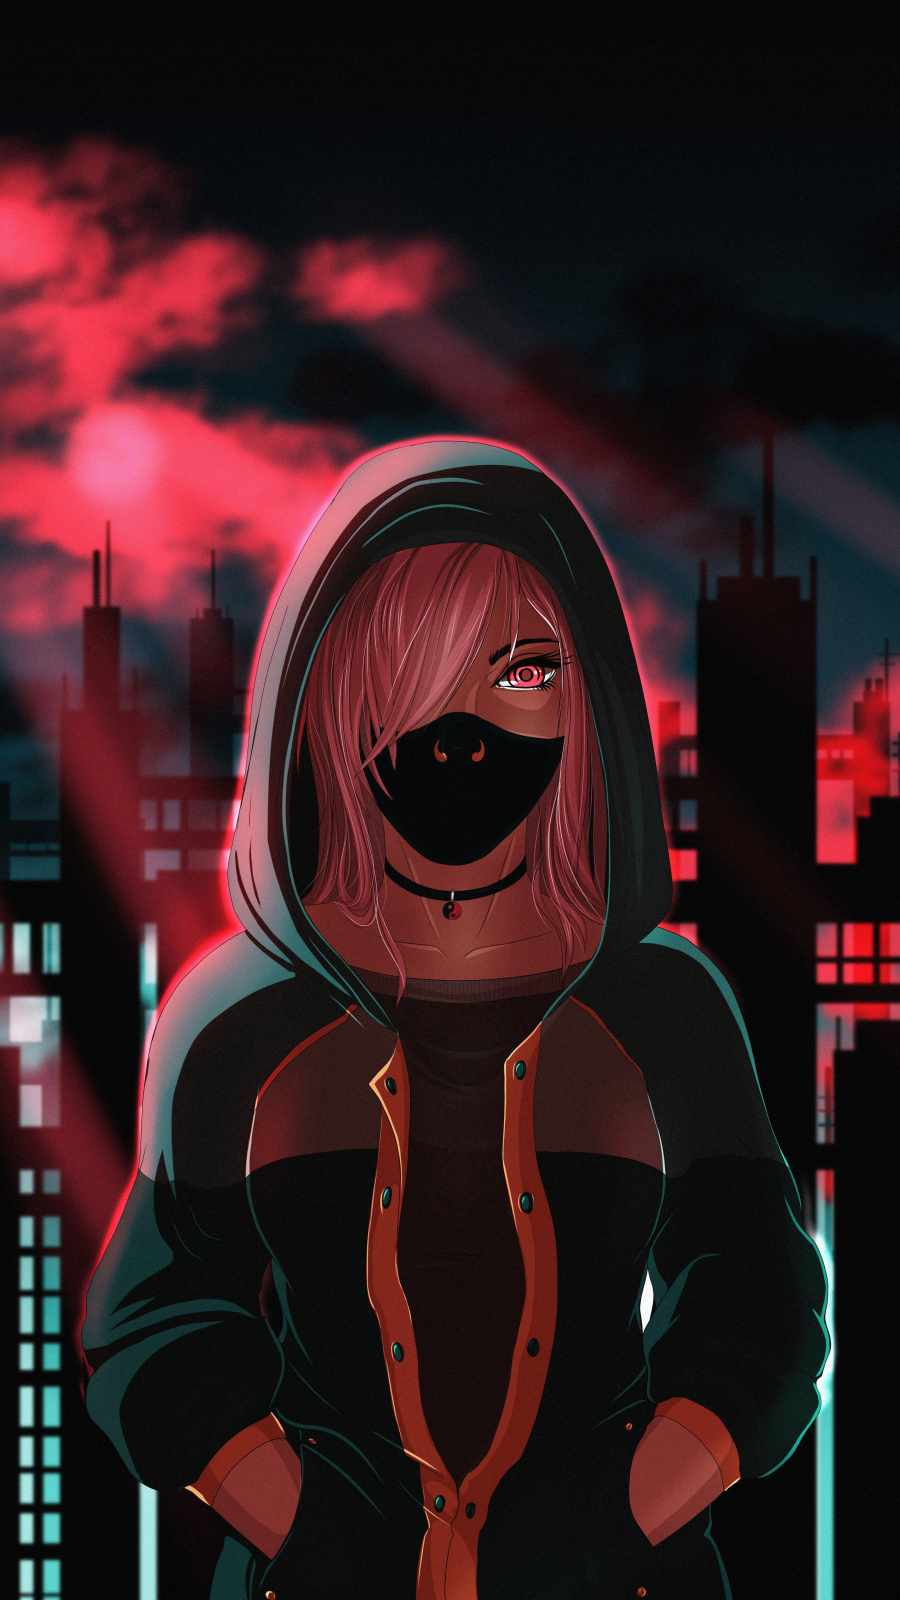 Hoodie Masked Girl Anime - IPhone Wallpapers : iPhone Wallpapers